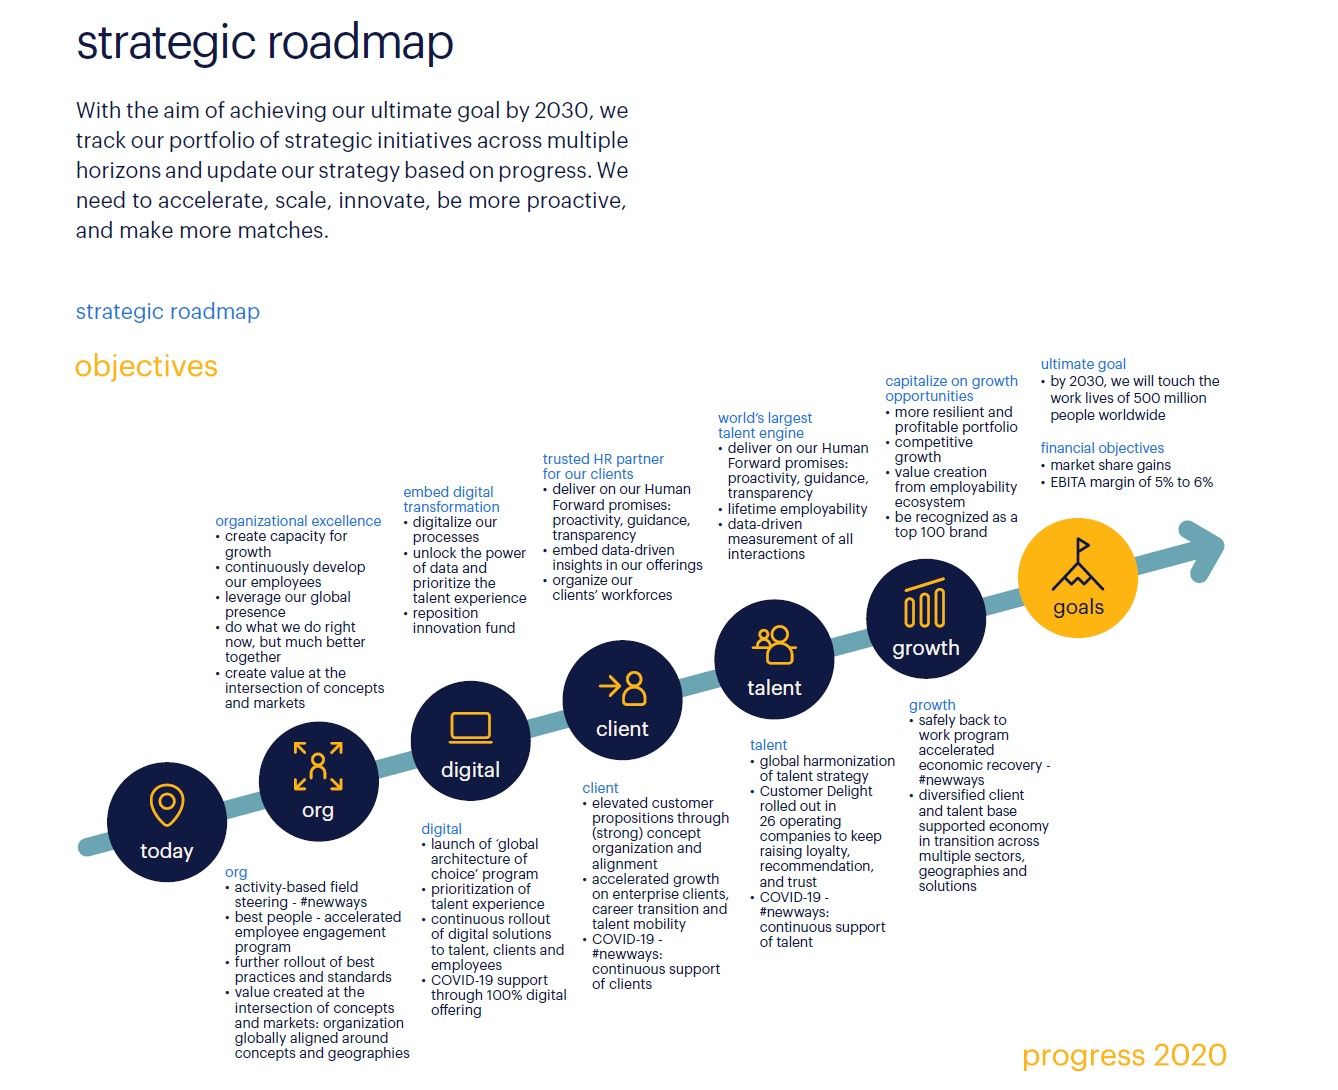 Screenshot from Randstad's Annual Report 2020